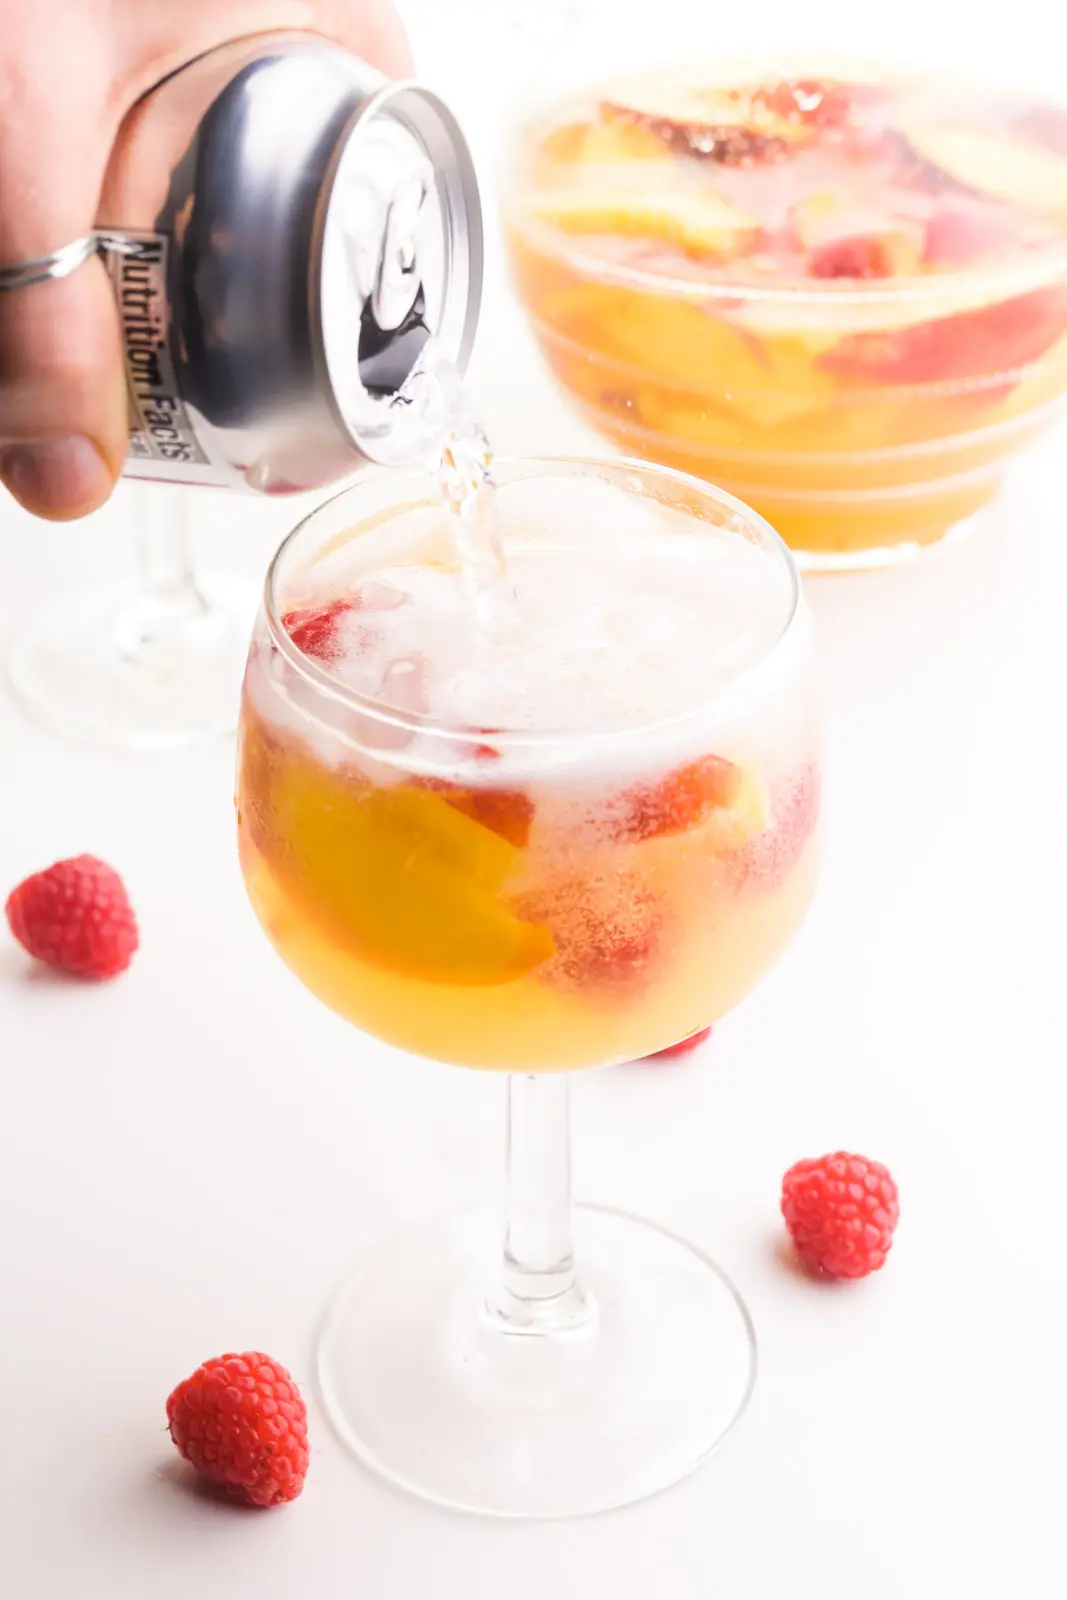 A hand holds a can of club soda and is pouring it into a wine glass full of sangria. There are fresh raspberries around the glass and a pitcher of sangria in the background.